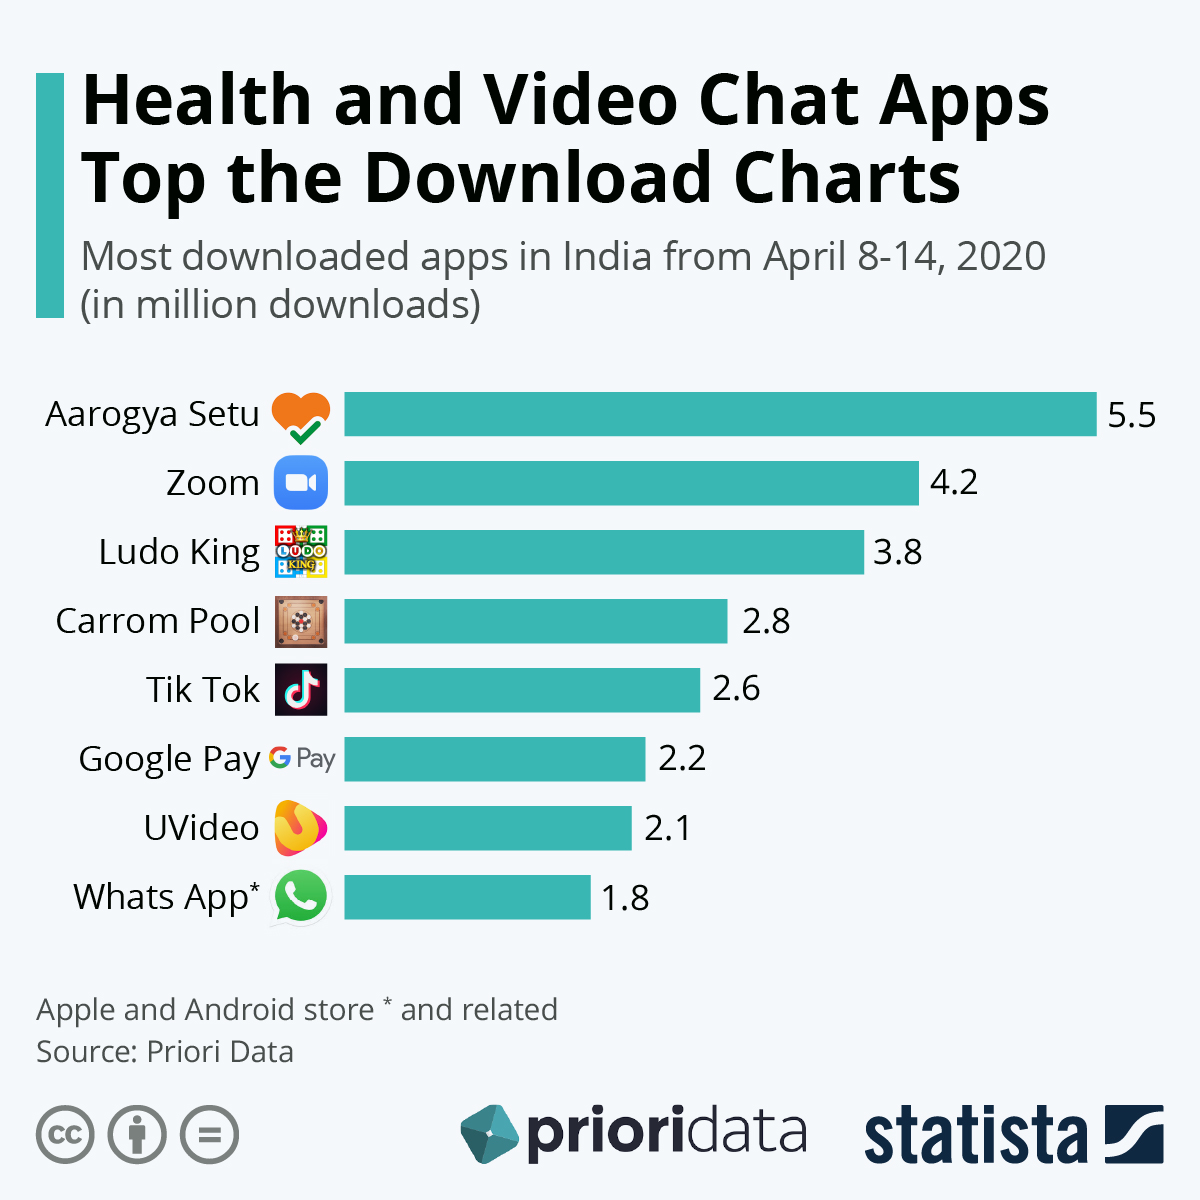 Health and Video Chat Apps Top the Download Charts 

#Coronavirus #VideoChat #Apps #VideoApps #Covid19